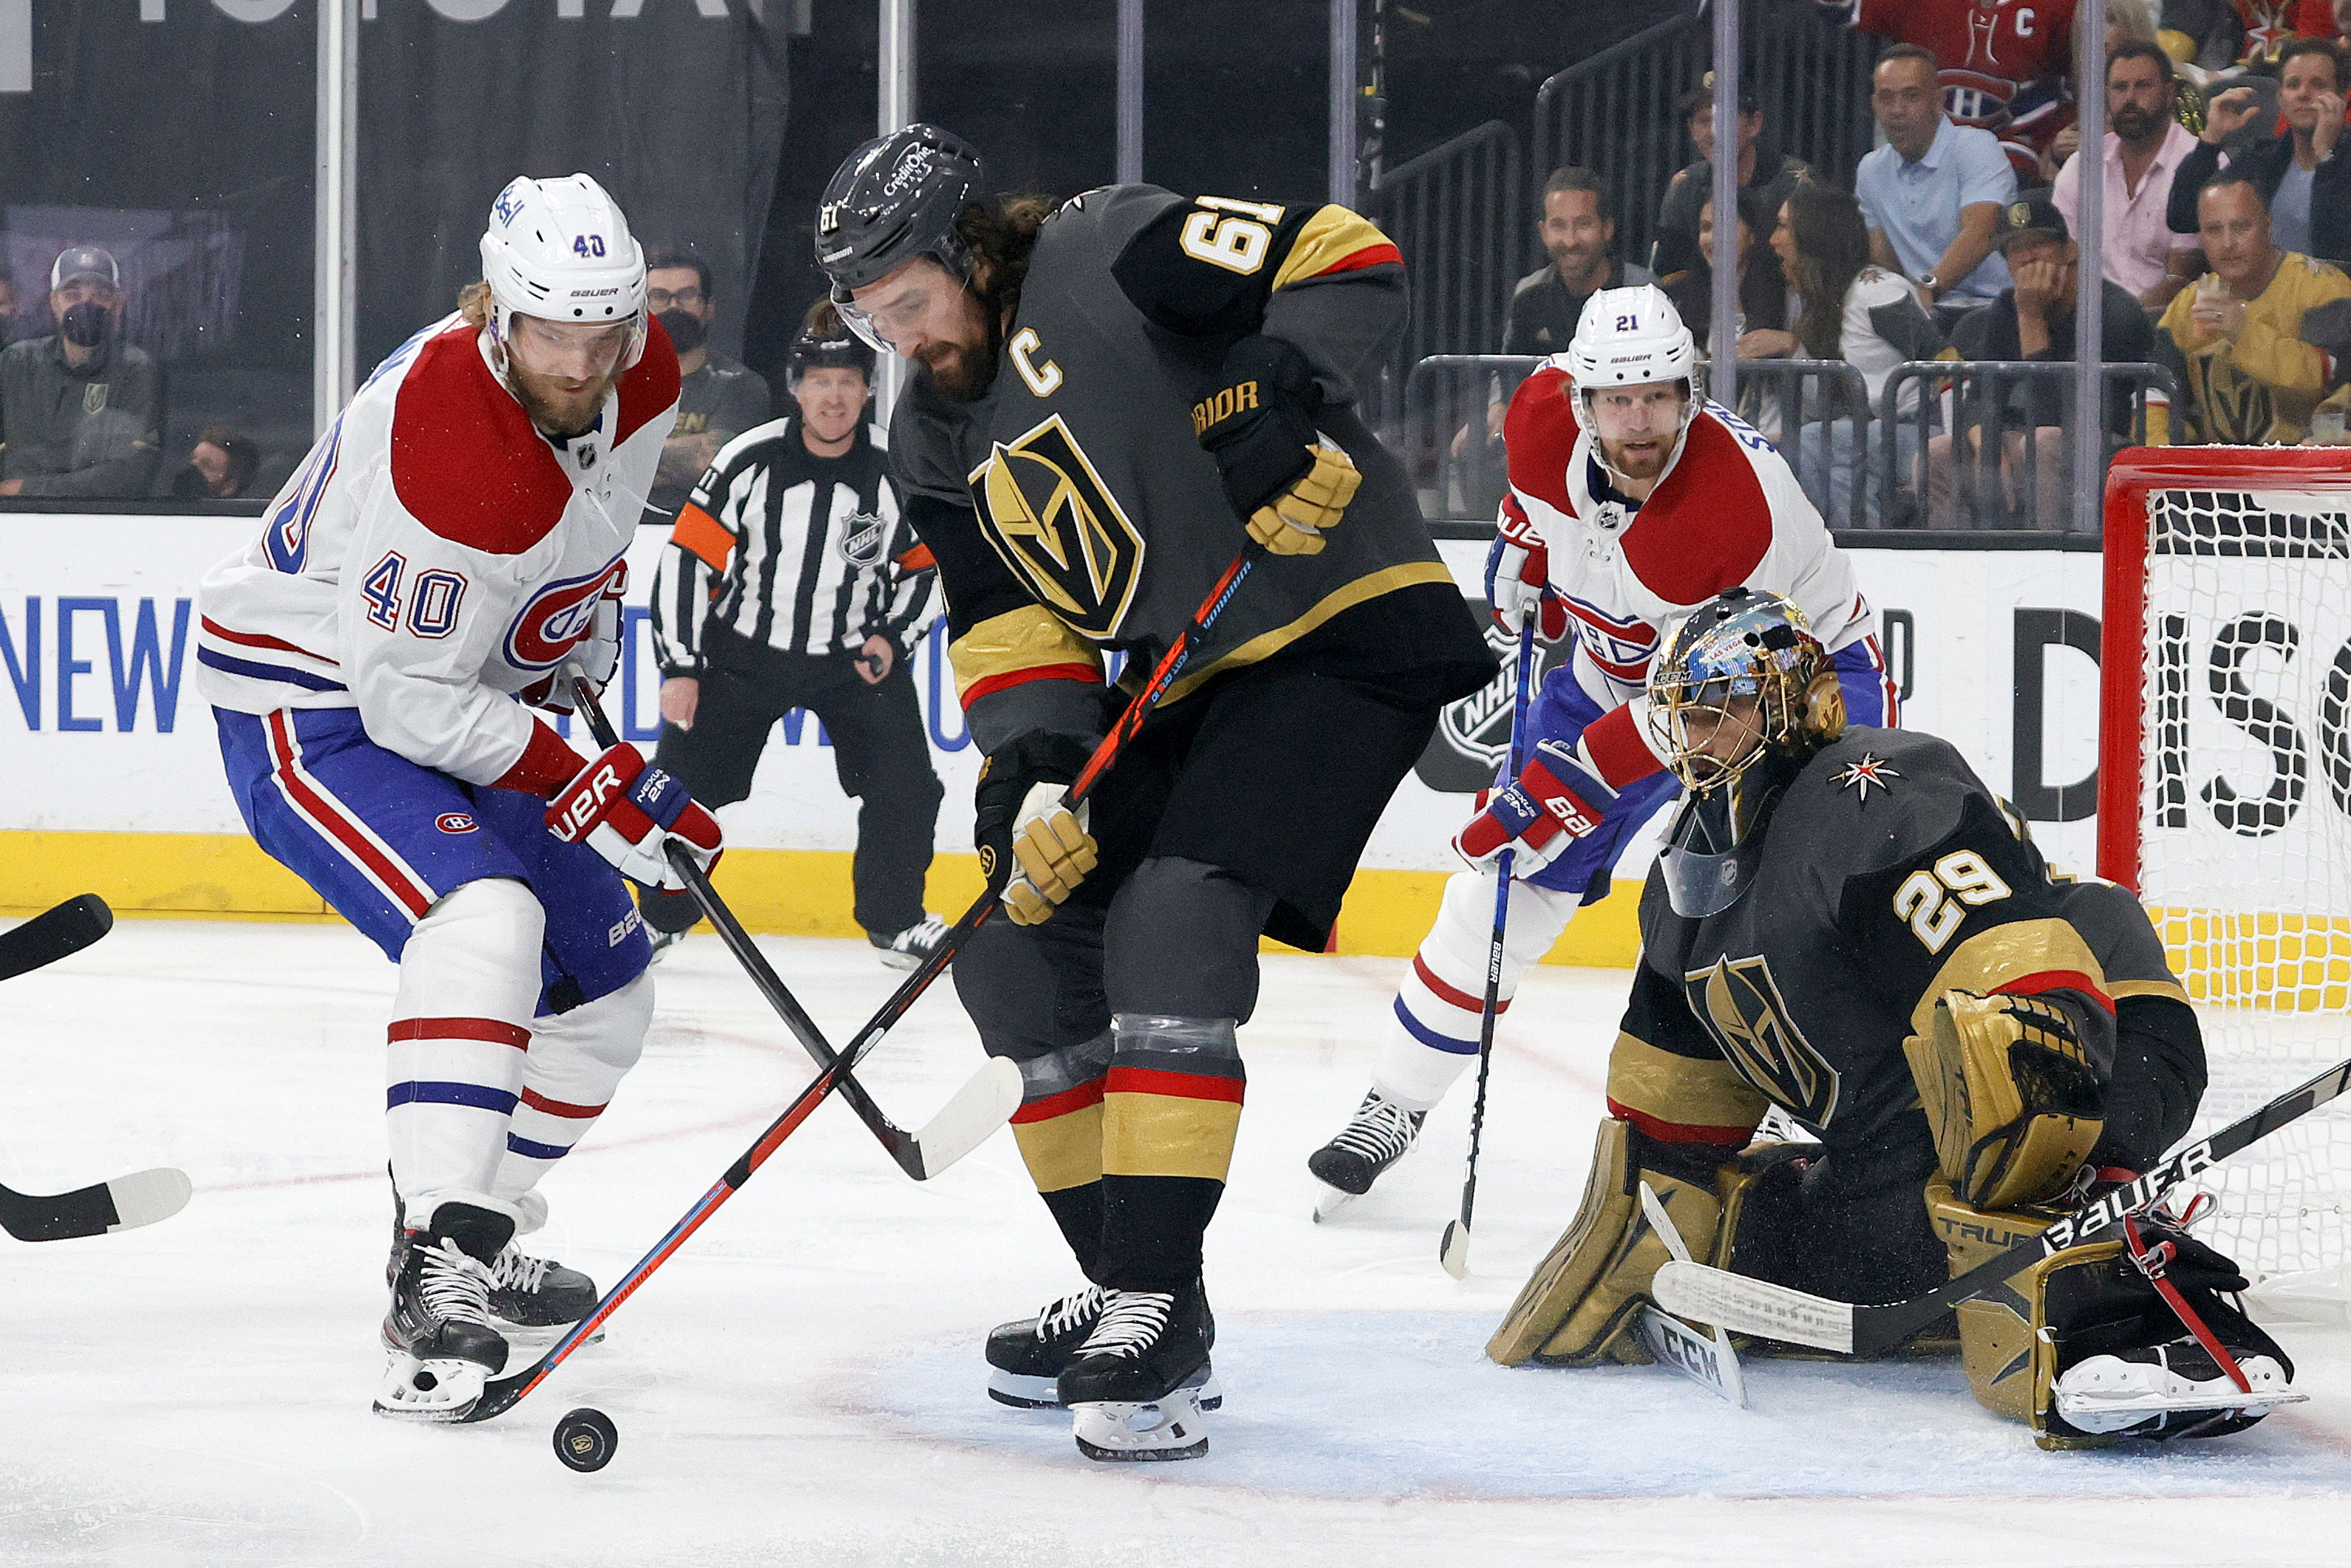 Joel Armia #40 of the Montreal Canadiens and Mark Stone #61 of the Vegas Golden Knights battle for the puck as Marc-Andre Fleury #29 tends net during the first period in Game 5 of the 2021 Stanley Cup Playoffs at T-Mobile Arena on June 22, 2021 in Las Vegas, Nevada.